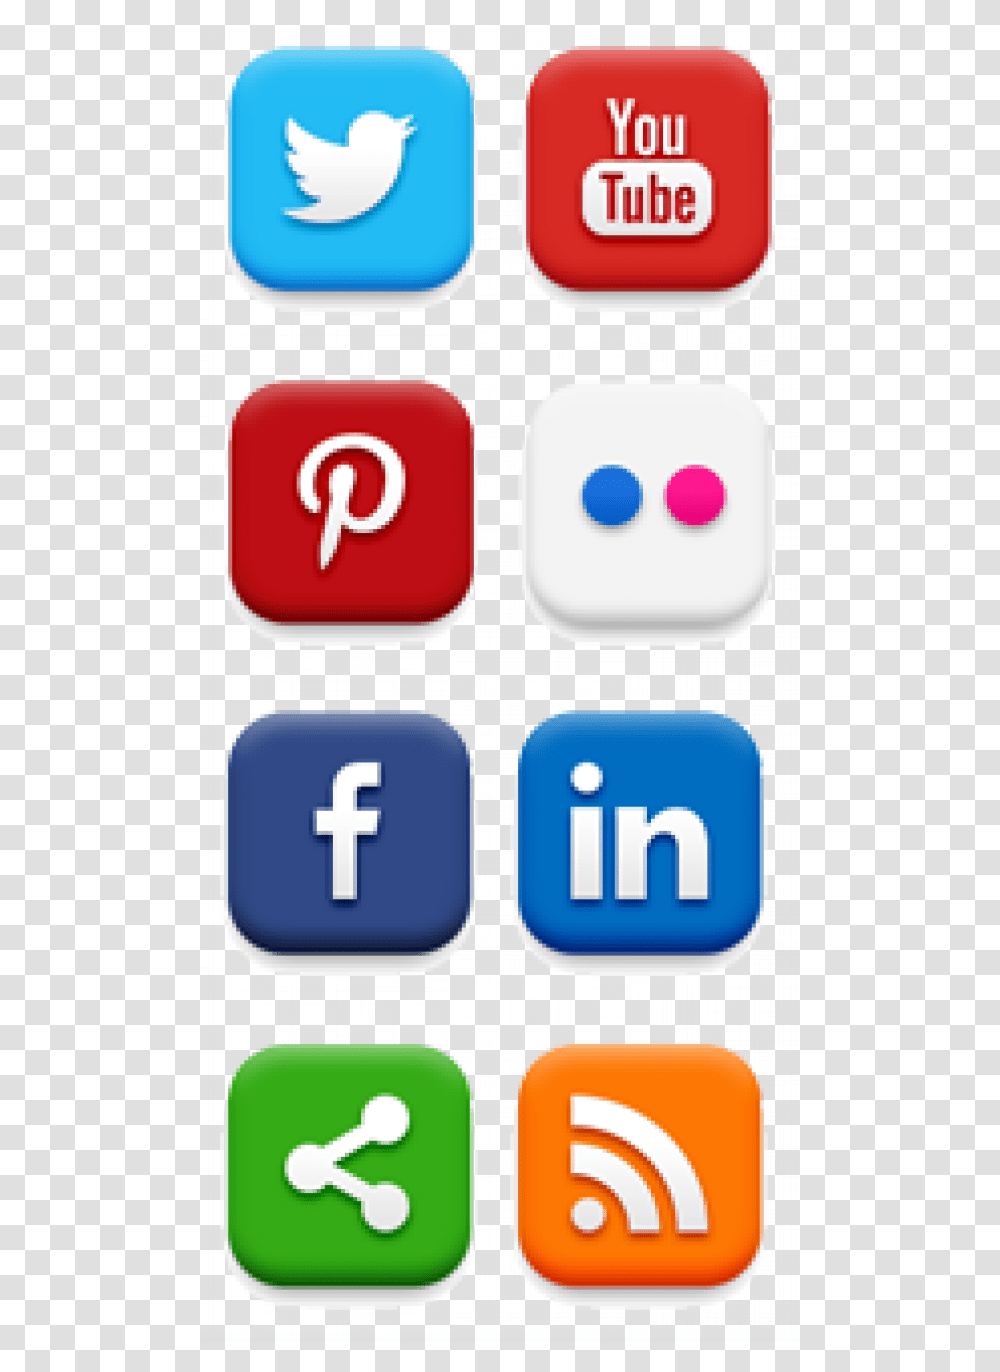 Social Media Vertical Free Icons Download Images Social Media Vertical, Number, Dice Transparent Png